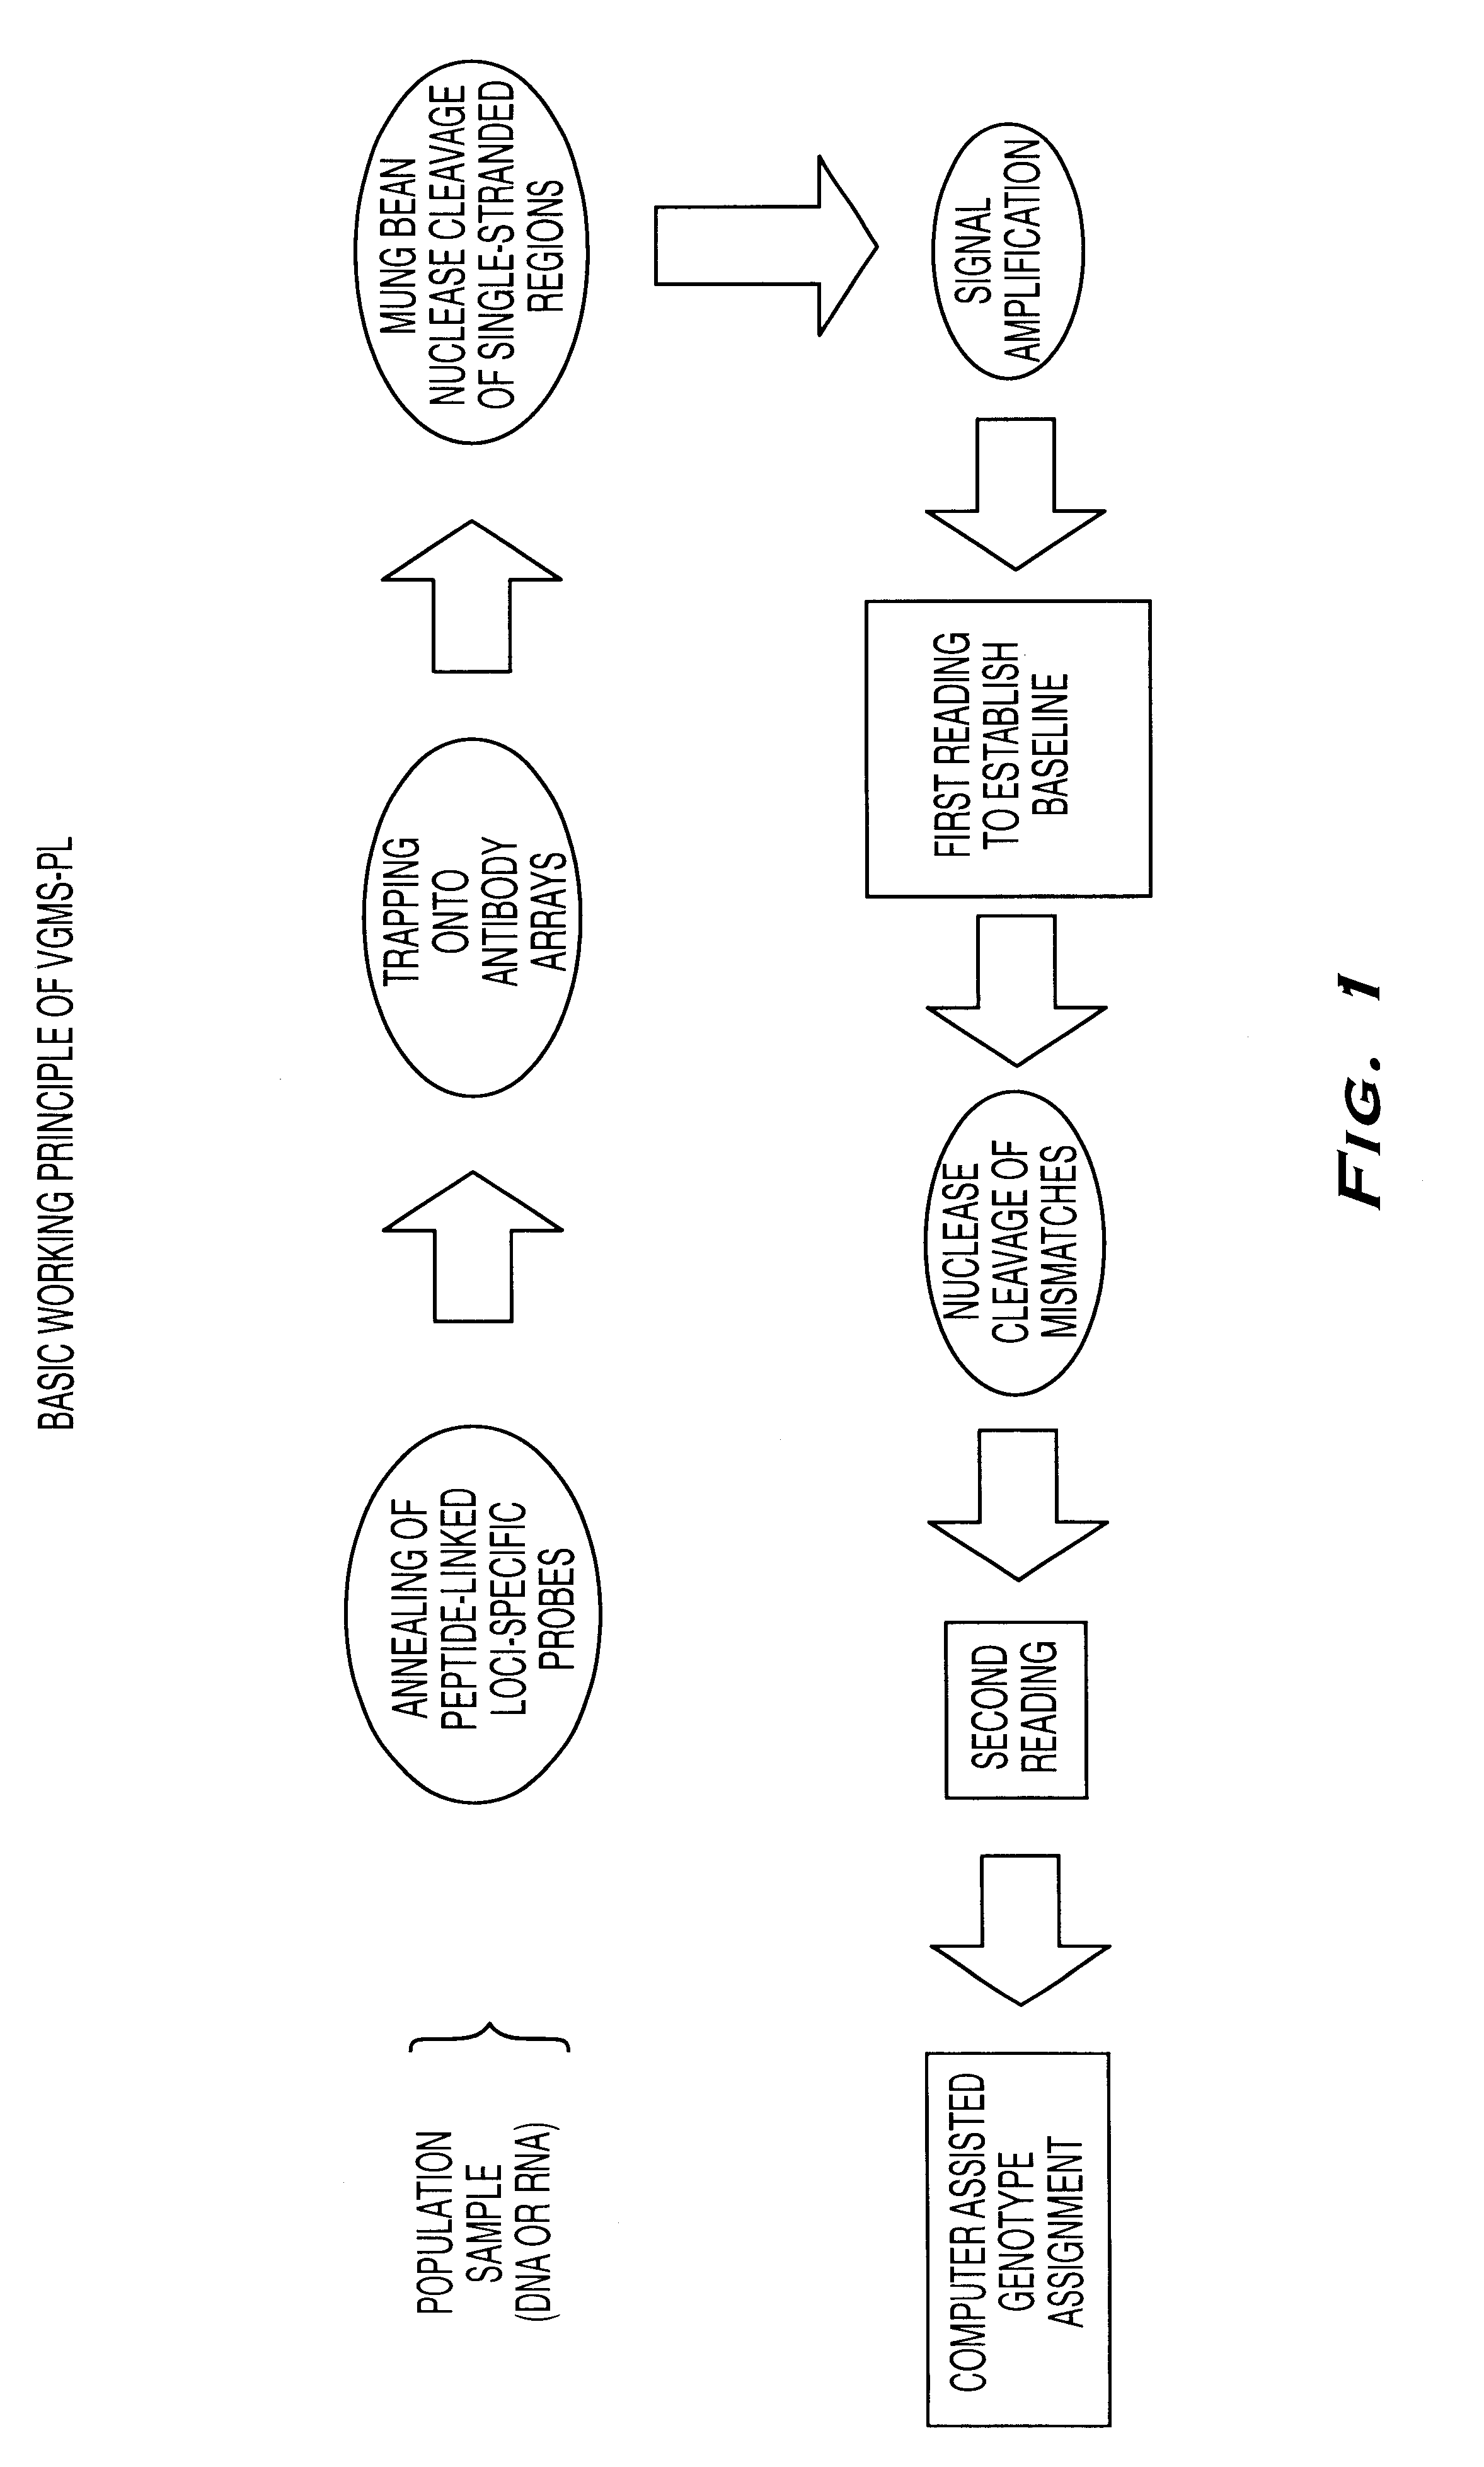 Methods for detection of nucleic acid polymorphisms using peptide-labeled oligonucleotides and antibody arrays